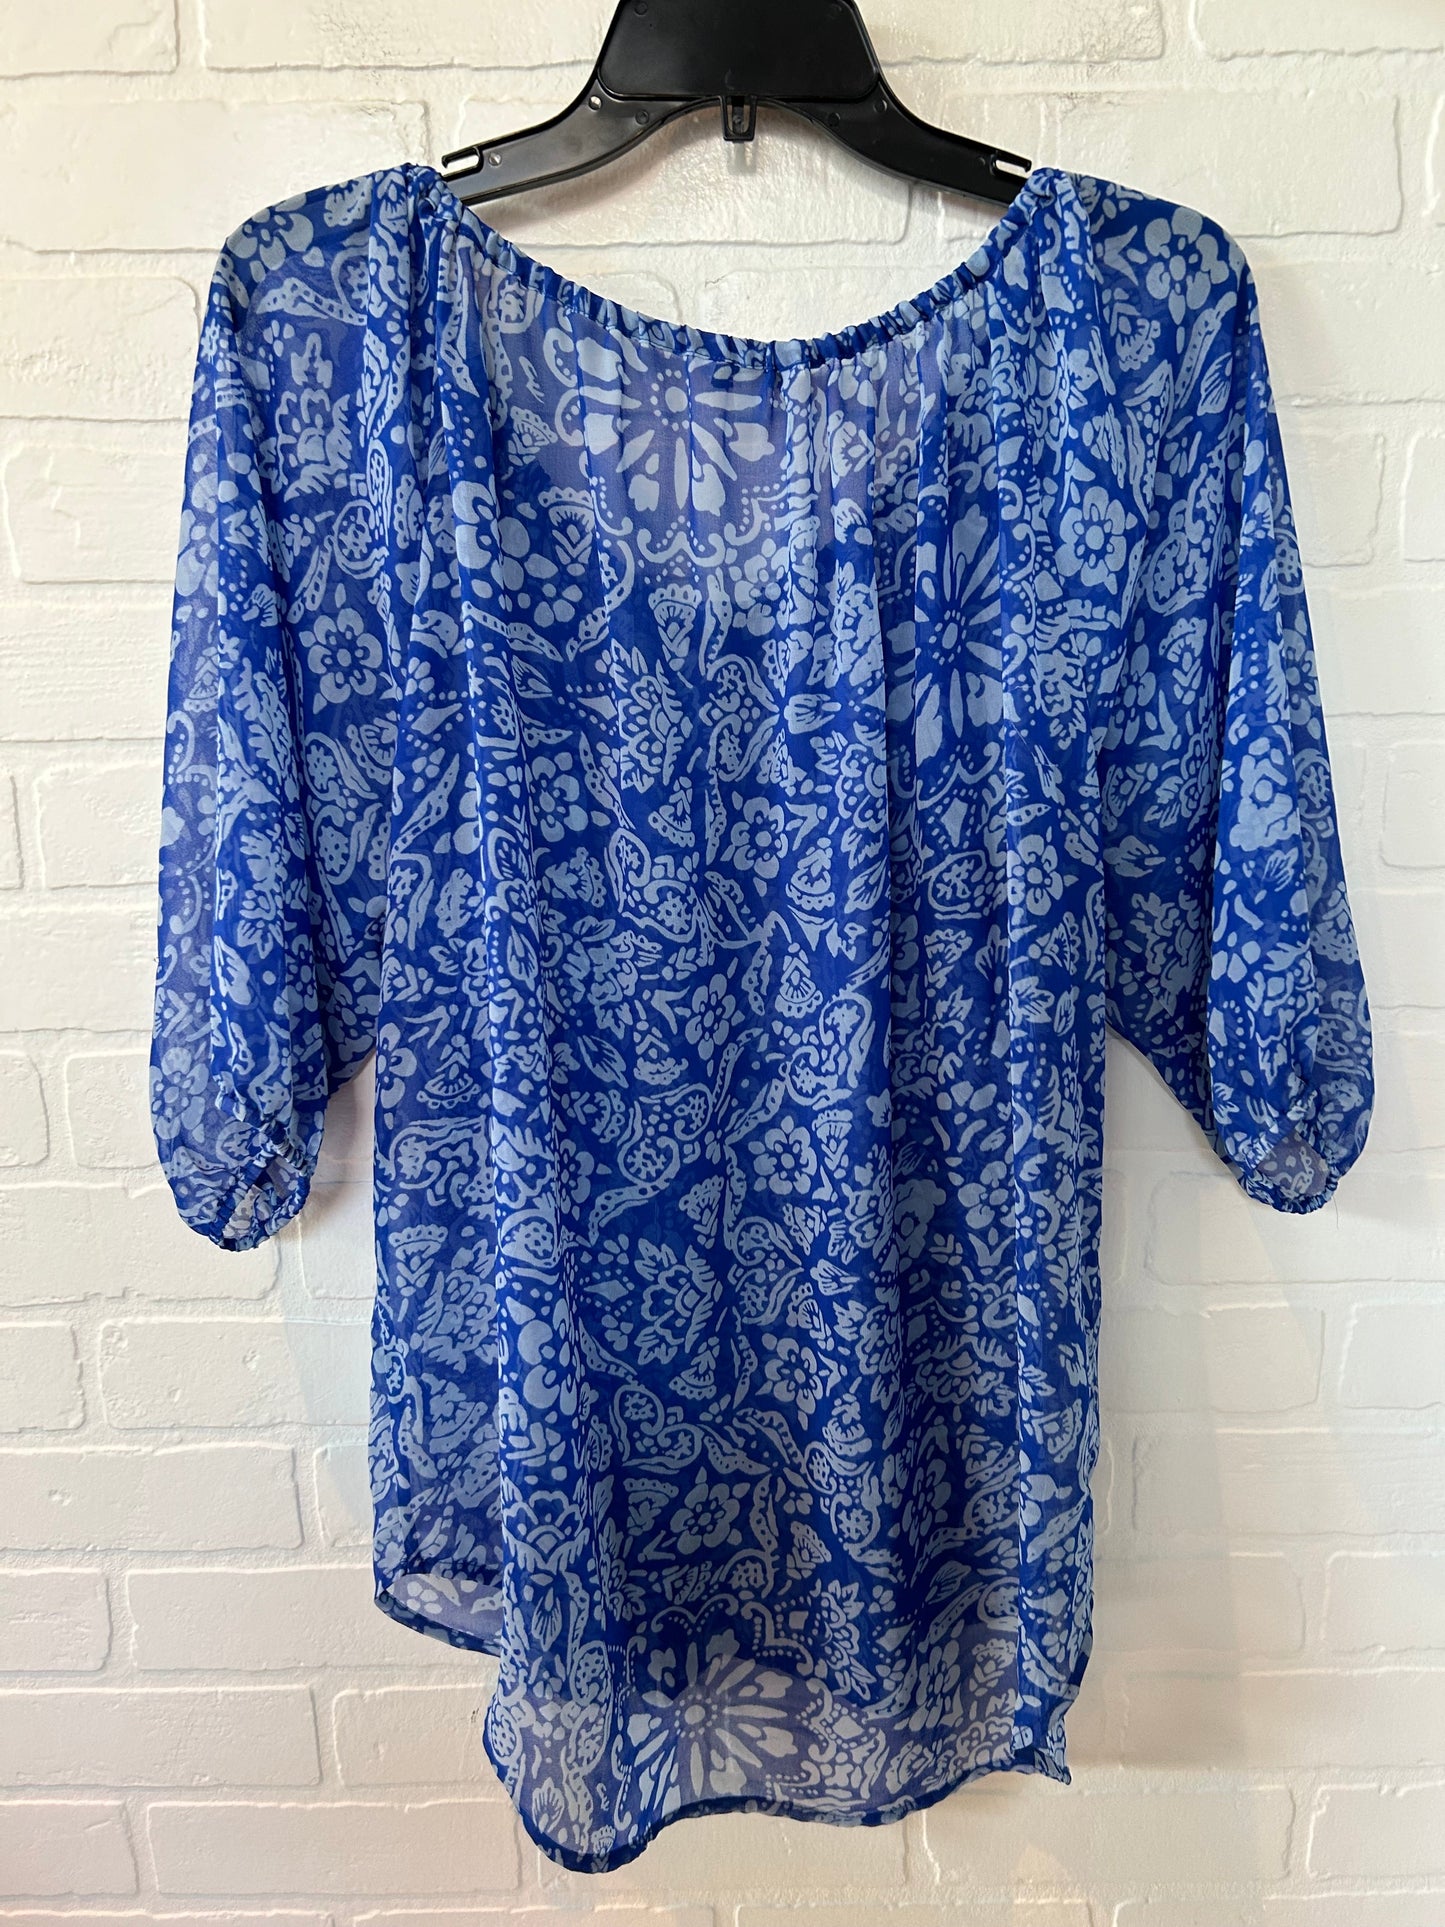 Blue Top 3/4 Sleeve Cabi, Size S